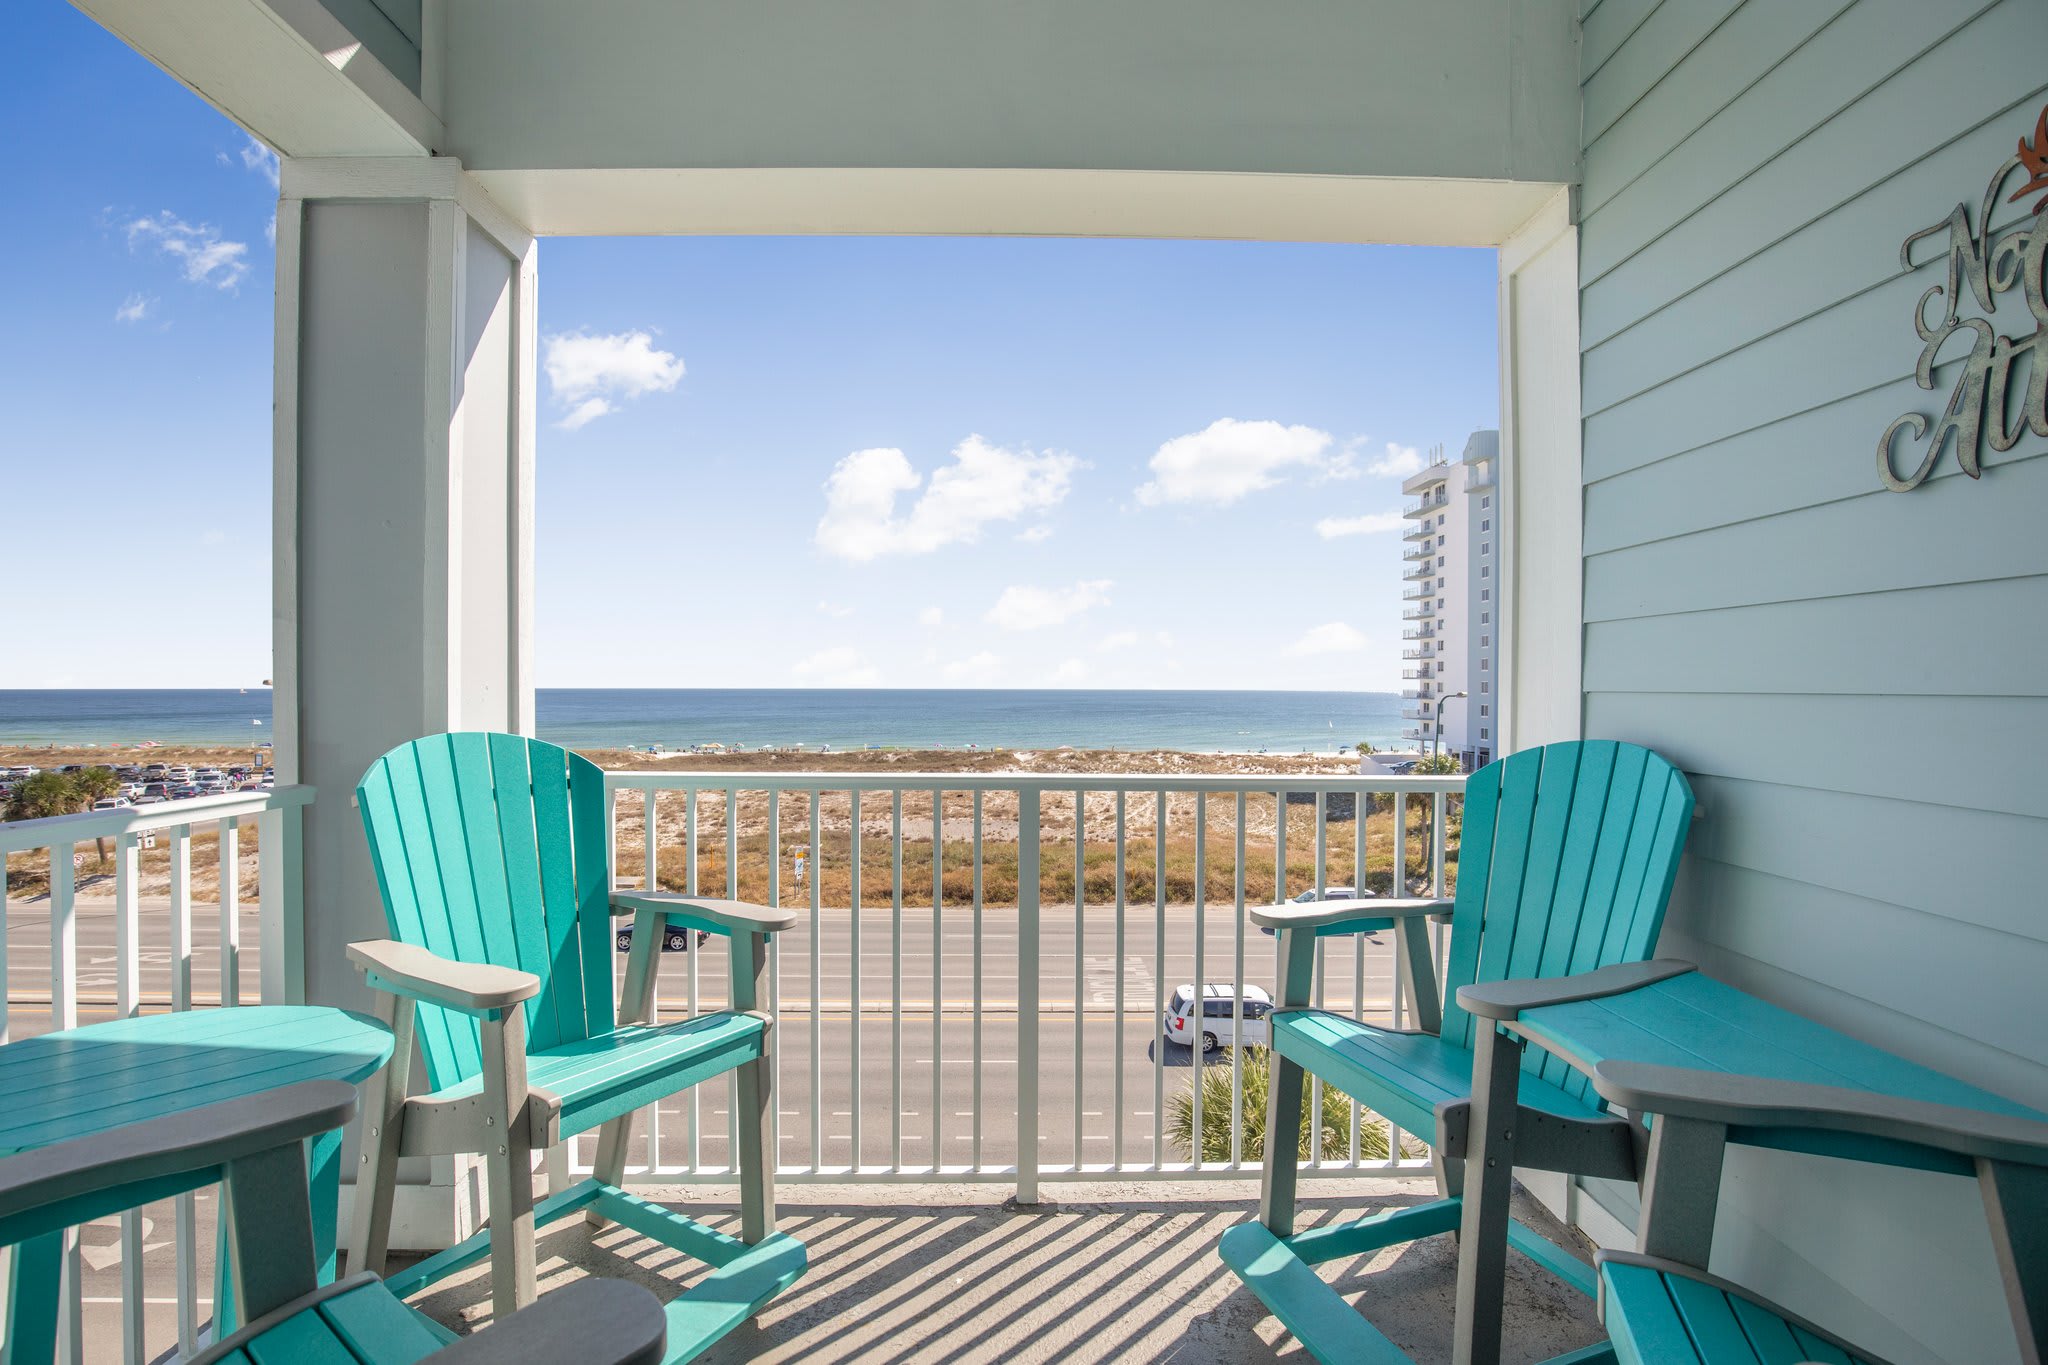 Attractive condo pool across from beach access